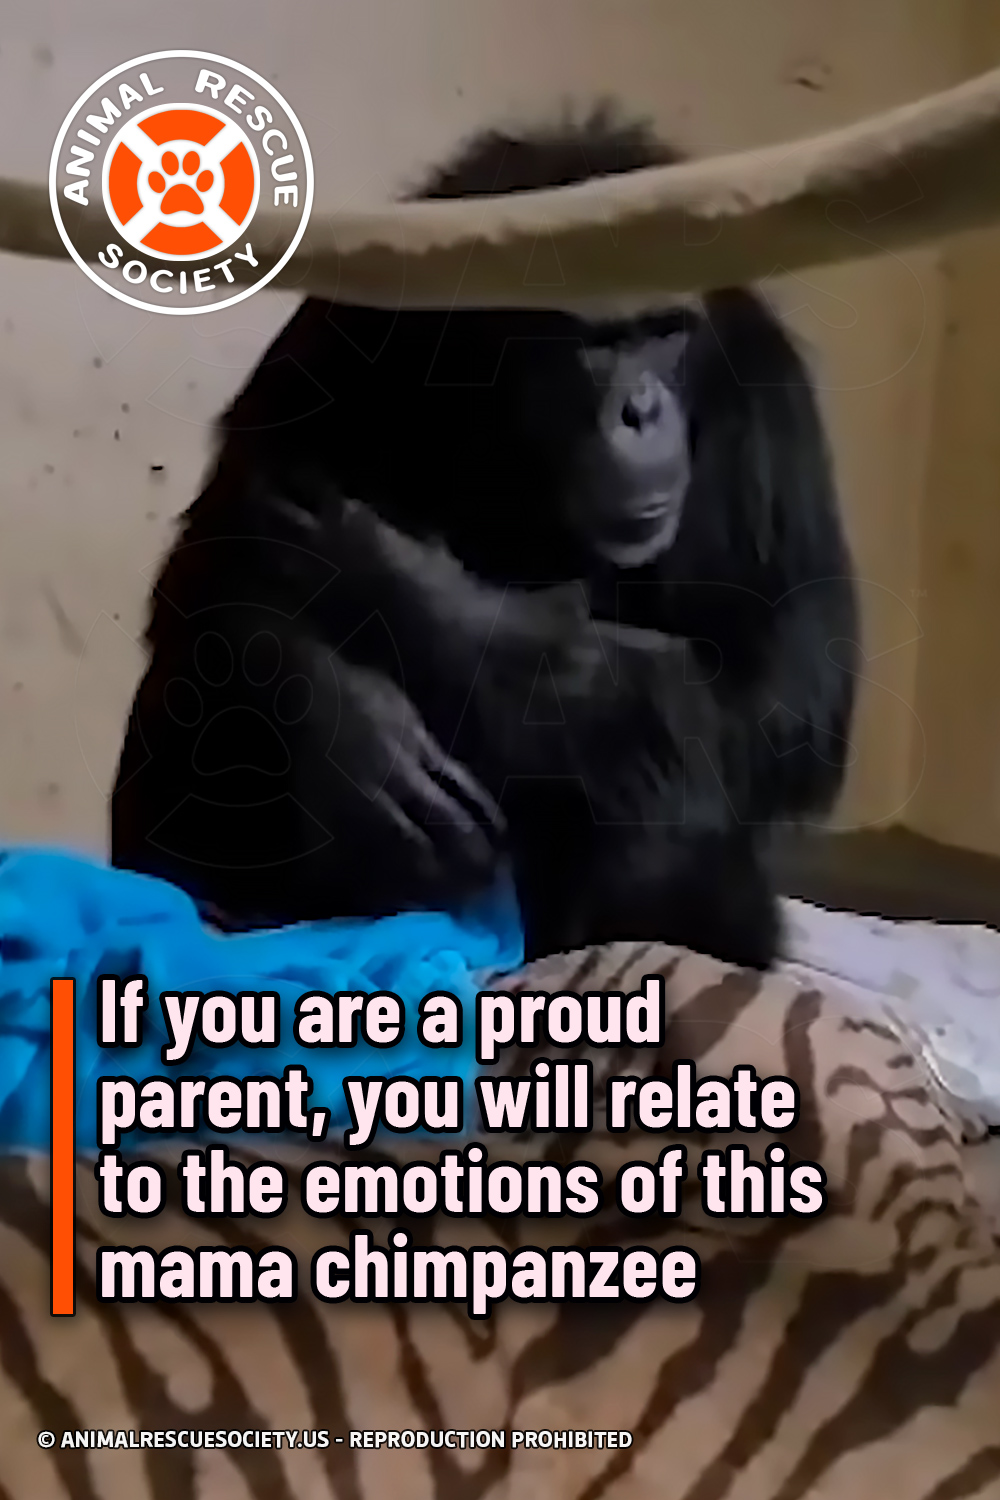 If you are a proud parent, you will relate to the emotions of this mama chimpanzee